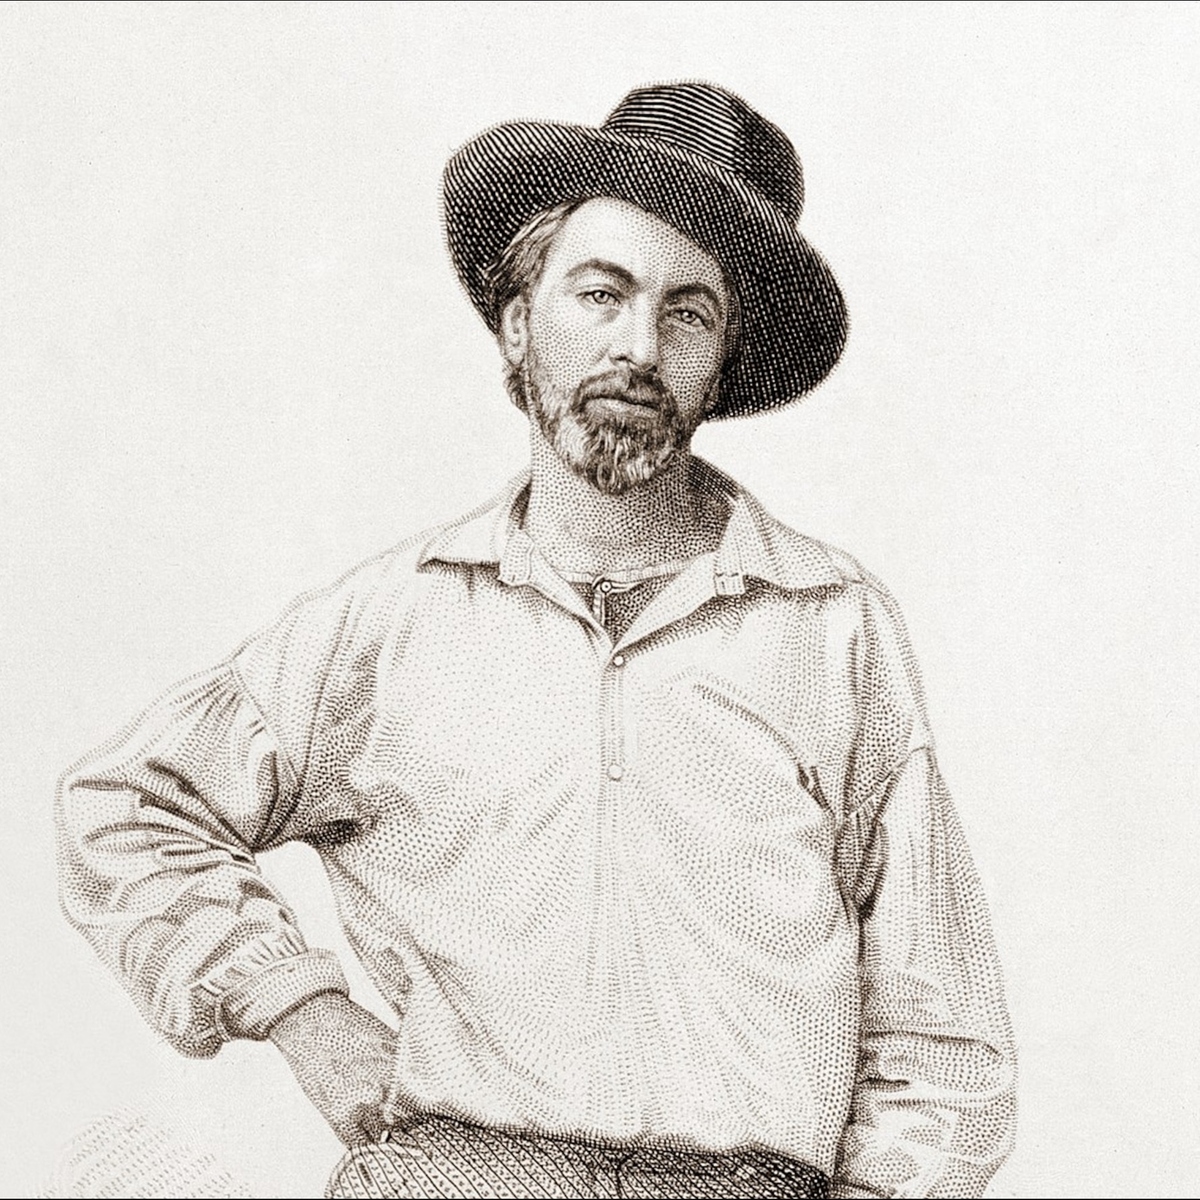 How Walt Whitman Imbued New Meaning on an Old Flower